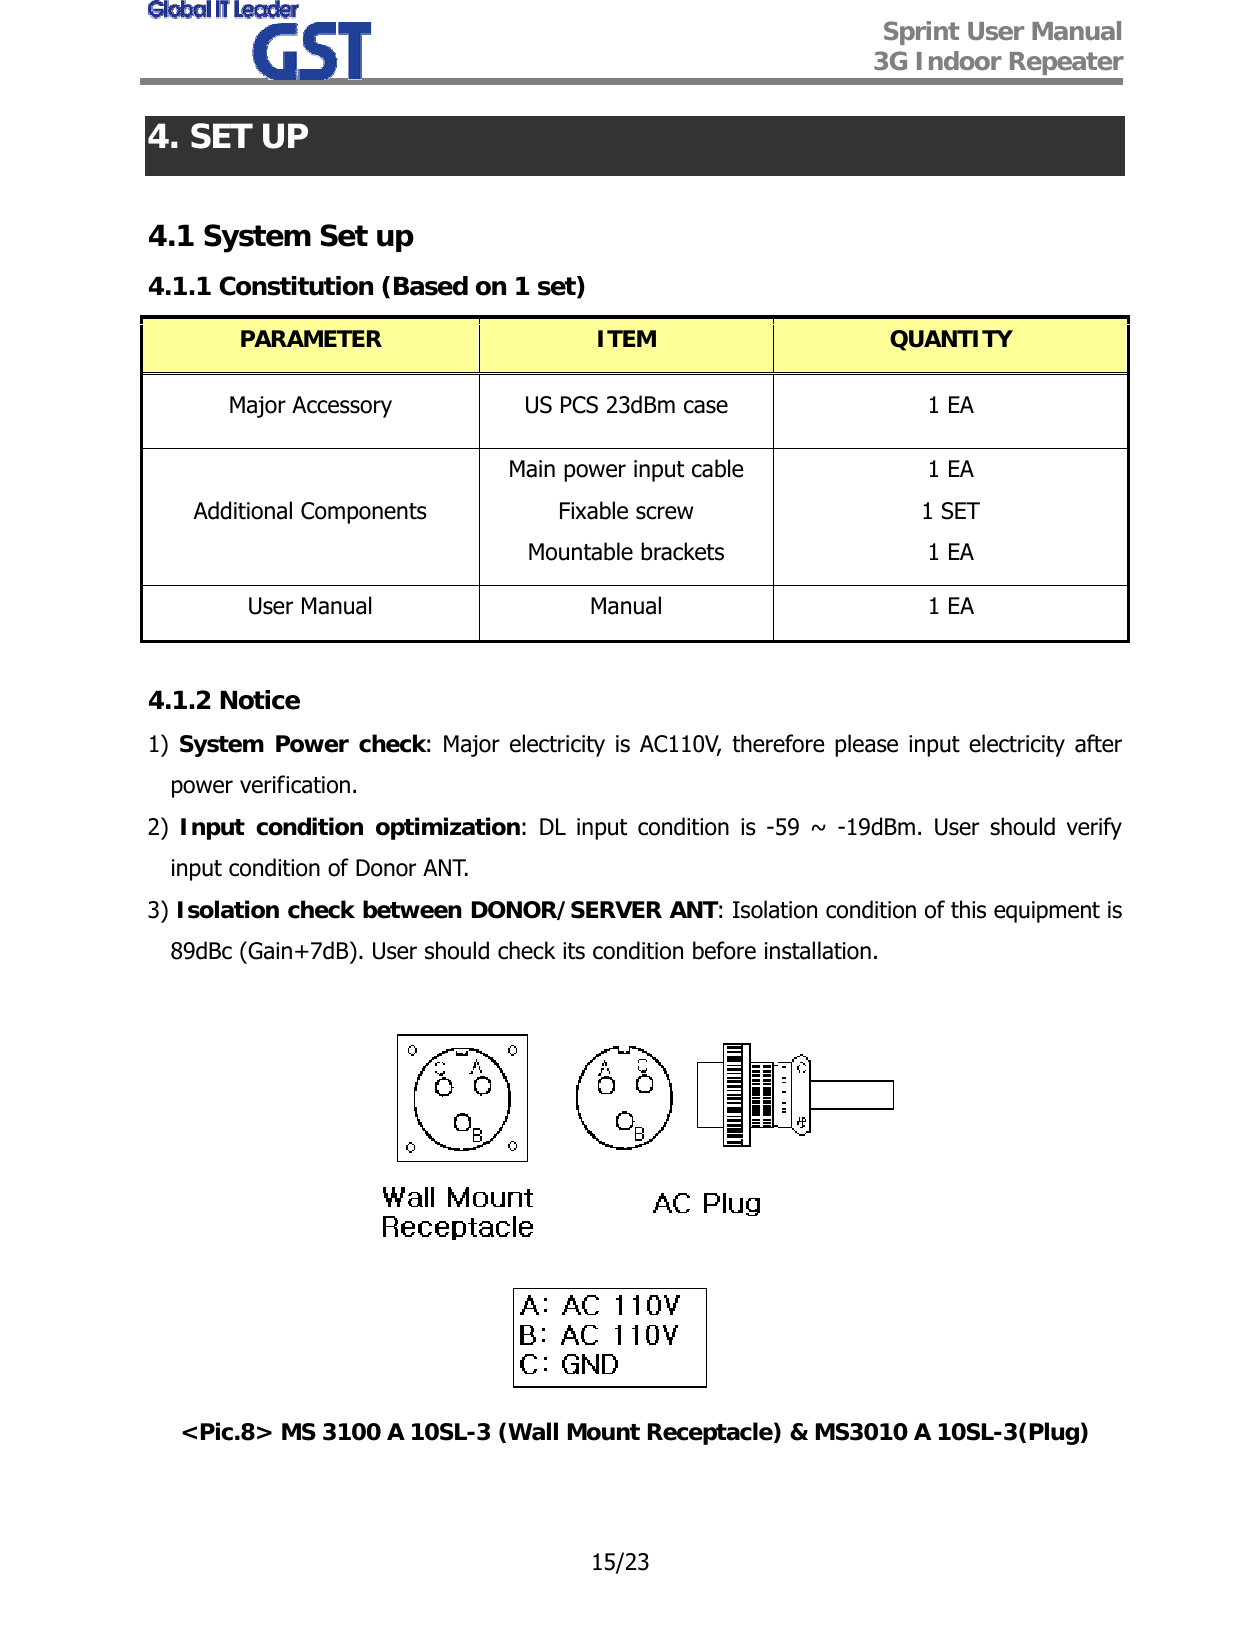  Sprint User Manual 3G Indoor Repeater   15/23 4. SET UP  4.1 System Set up 4.1.1 Constitution (Based on 1 set) PARAMETER  ITEM  QUANTITY Major Accessory  US PCS 23dBm case  1 EA Additional Components Main power input cable Fixable screw Mountable brackets 1 EA 1 SET 1 EA User Manual  Manual  1 EA  4.1.2 Notice 1) System Power check: Major electricity is AC110V, therefore please input electricity after power verification. 2)  Input condition optimization: DL input condition is -59 ~ -19dBm. User should verify input condition of Donor ANT. 3) Isolation check between DONOR/SERVER ANT: Isolation condition of this equipment is 89dBc (Gain+7dB). User should check its condition before installation.   &lt;Pic.8&gt; MS 3100 A 10SL-3 (Wall Mount Receptacle) &amp; MS3010 A 10SL-3(Plug)   